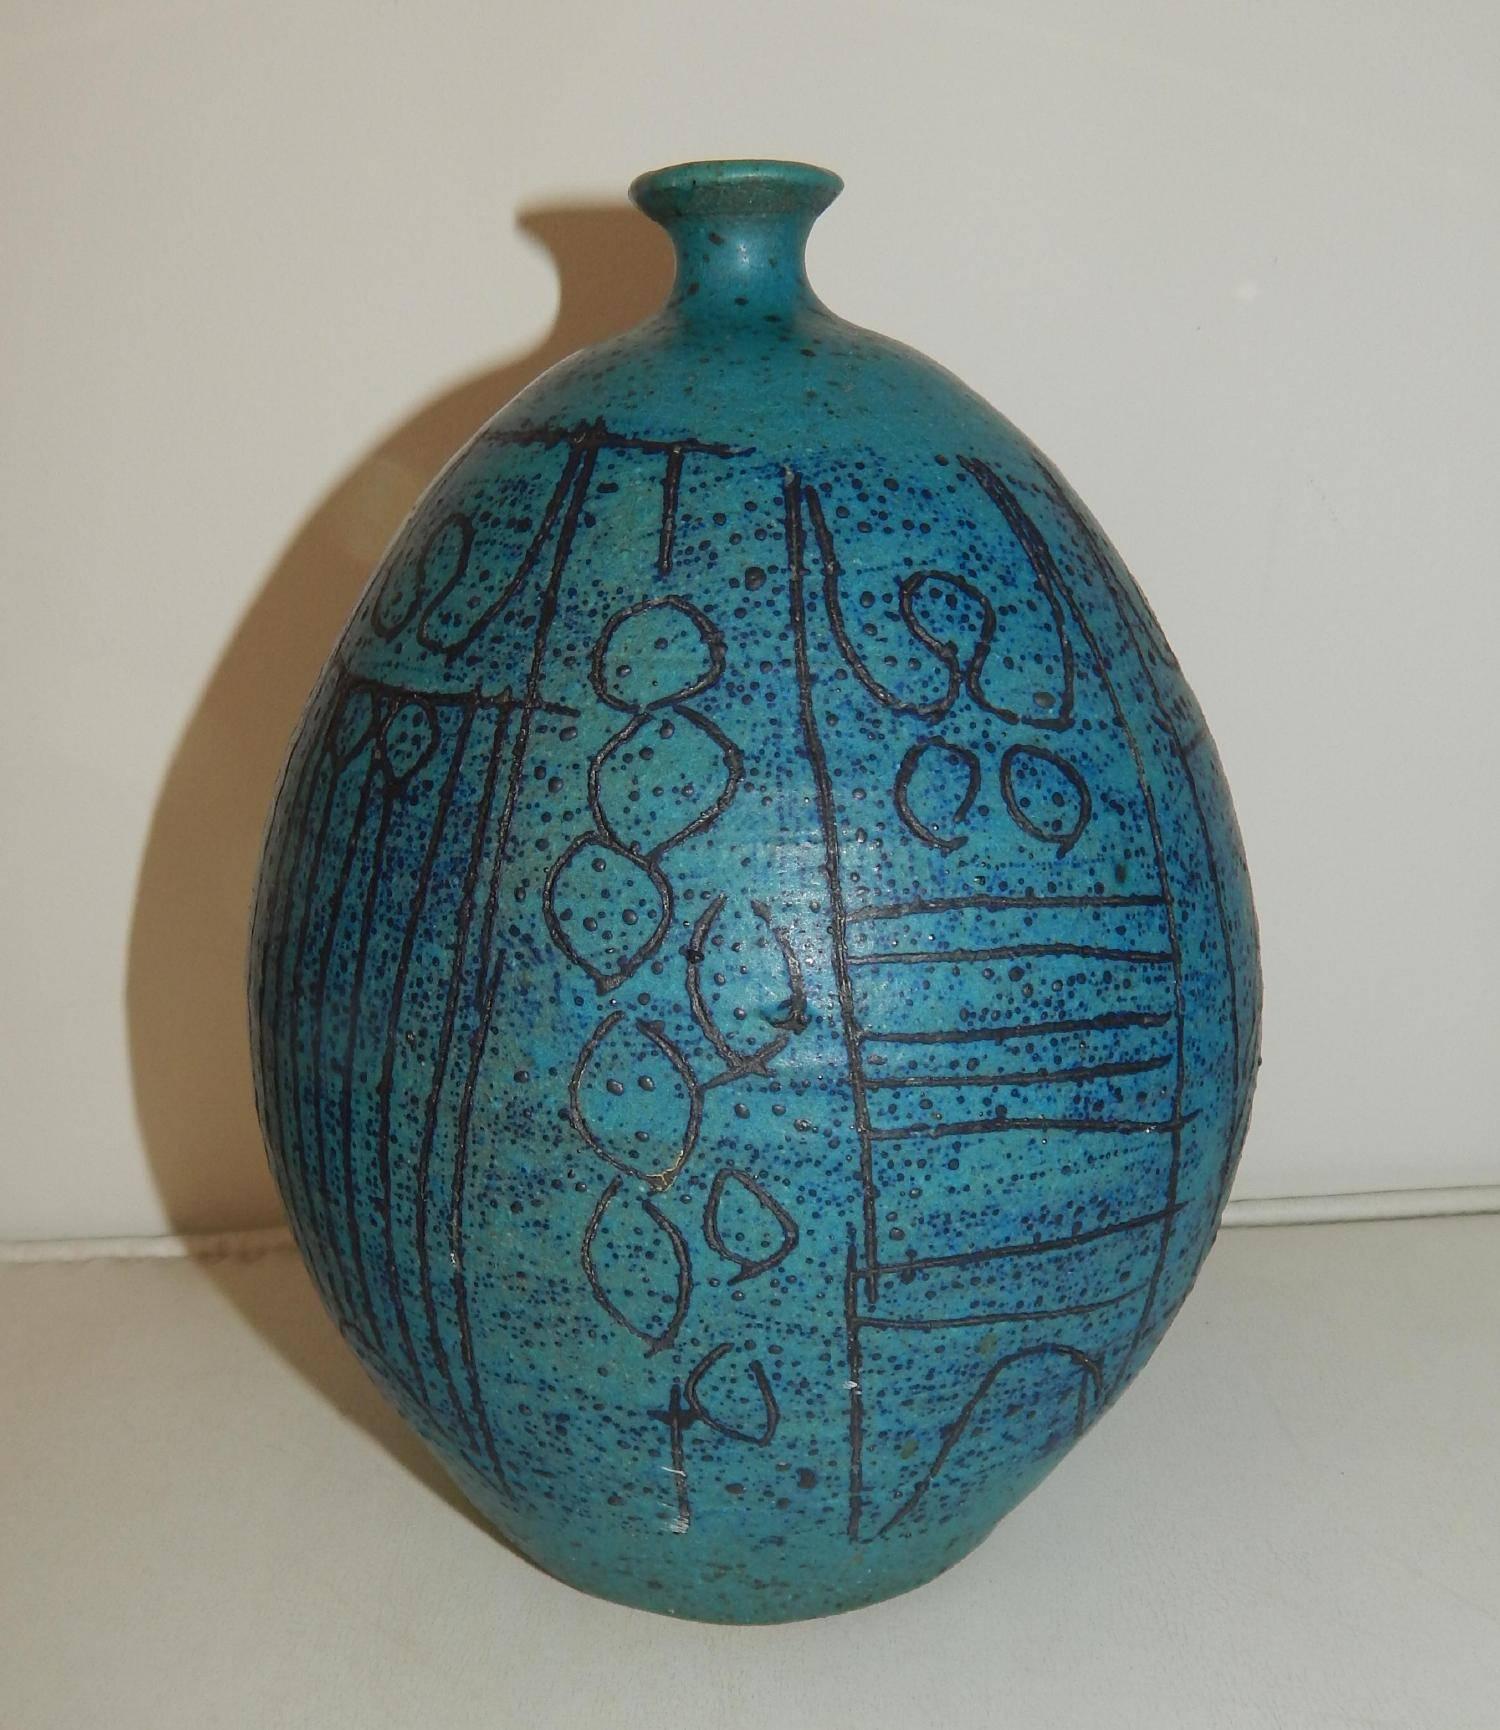 Blue stoneware bottle, wheel thrown, with modernist,
figurative sgraffito designs.
Marked: MKG.
By well-known designer and craftsman, Maurice K. Grossman,
from Tucson, Arizona who taught at the University there for many years.
Measures: 8